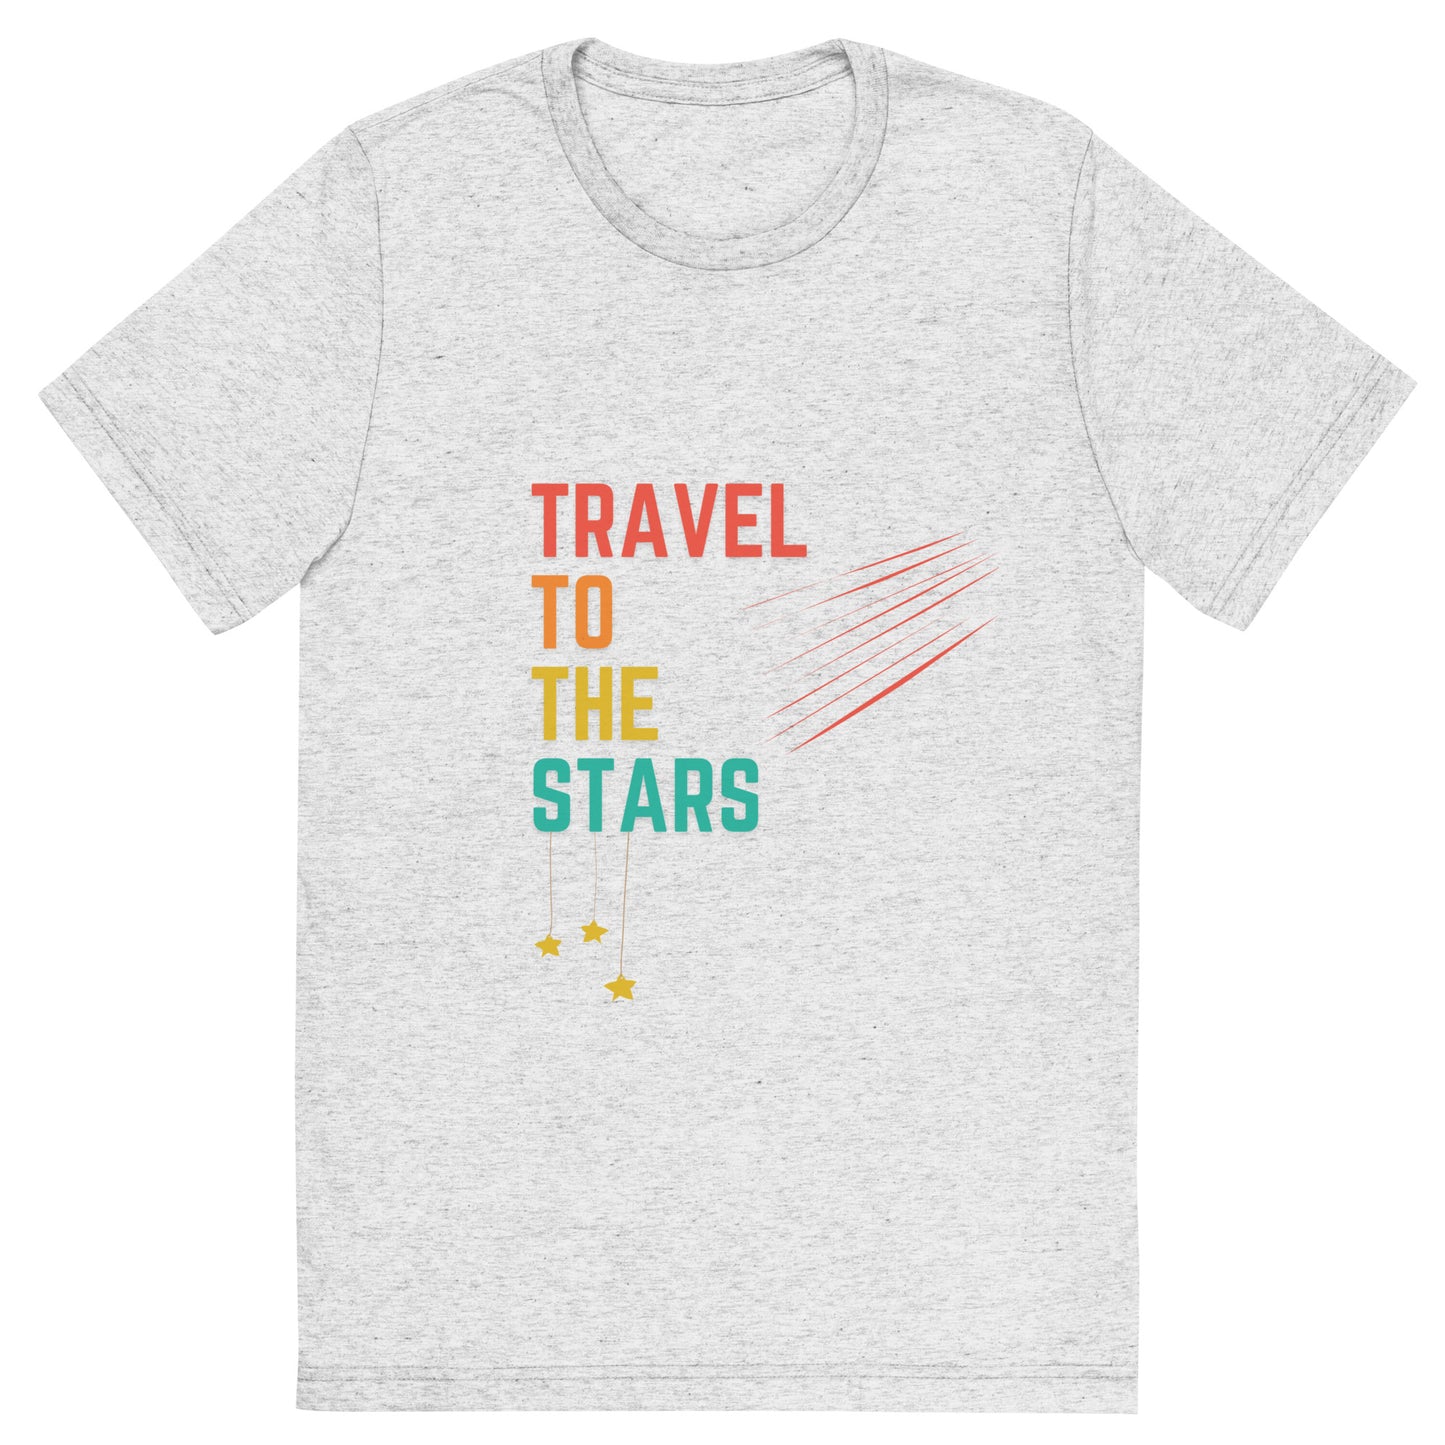 Stellar Journey, Travel, T-shirt, Stars, Inspirational, Motivational, Colorful, Fast, Going in style, Galactic travel, Dreams, Unisex